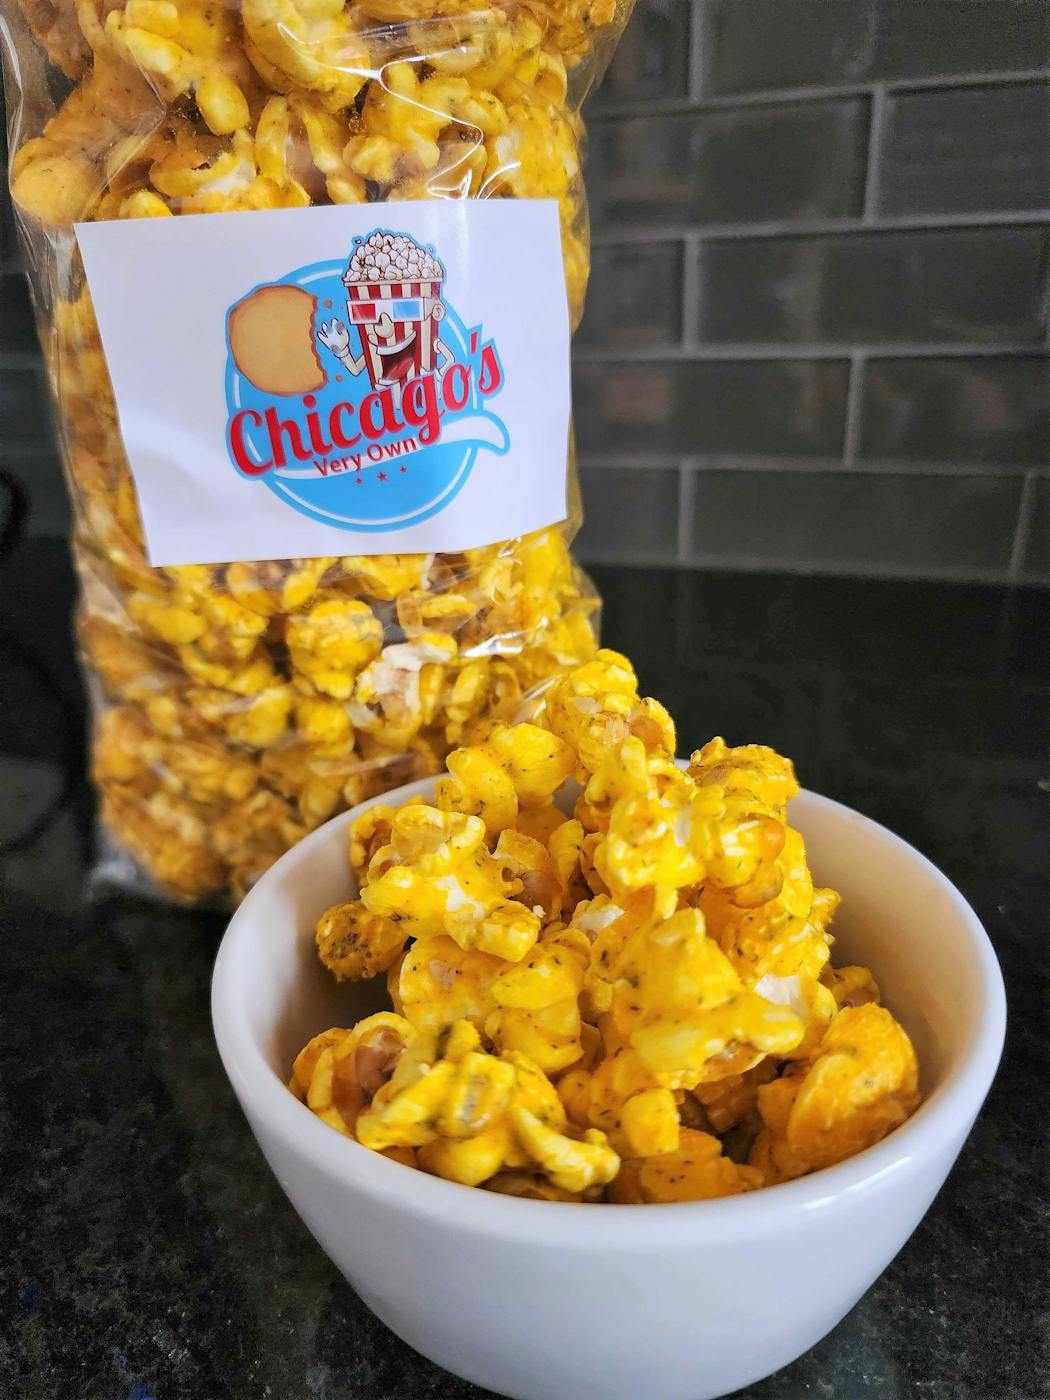 Cheesy Dill Popcorn from Chicago’s Very Own.